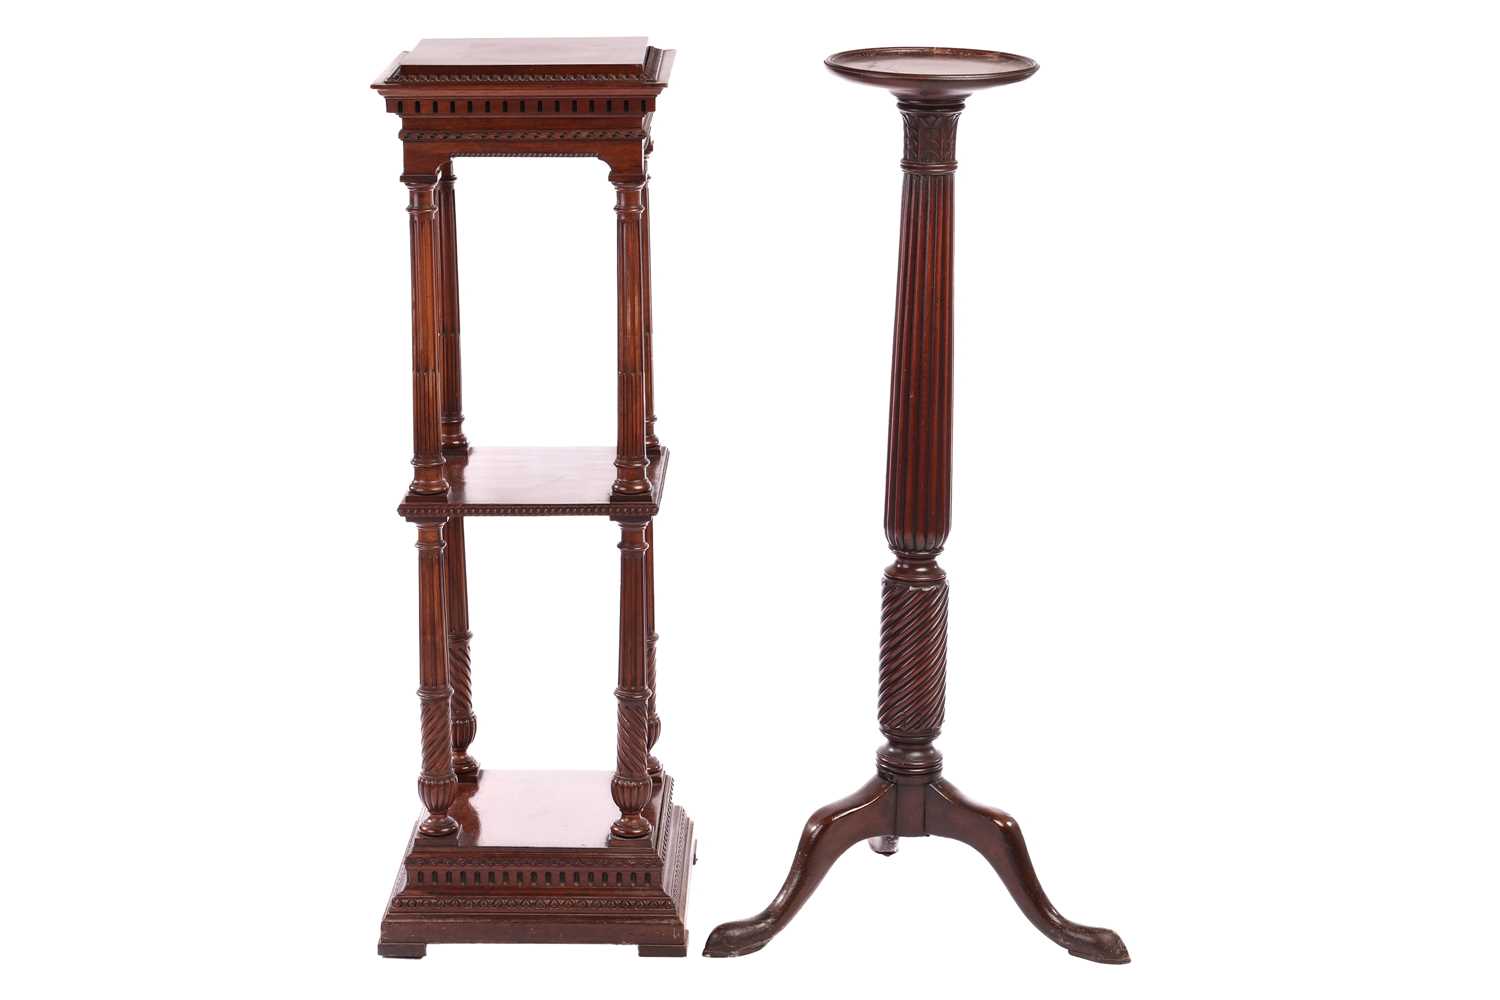 An Edwardian mahogany two-tier pedestal of architectural, form with dentil moulding and fluted colum - Image 2 of 6